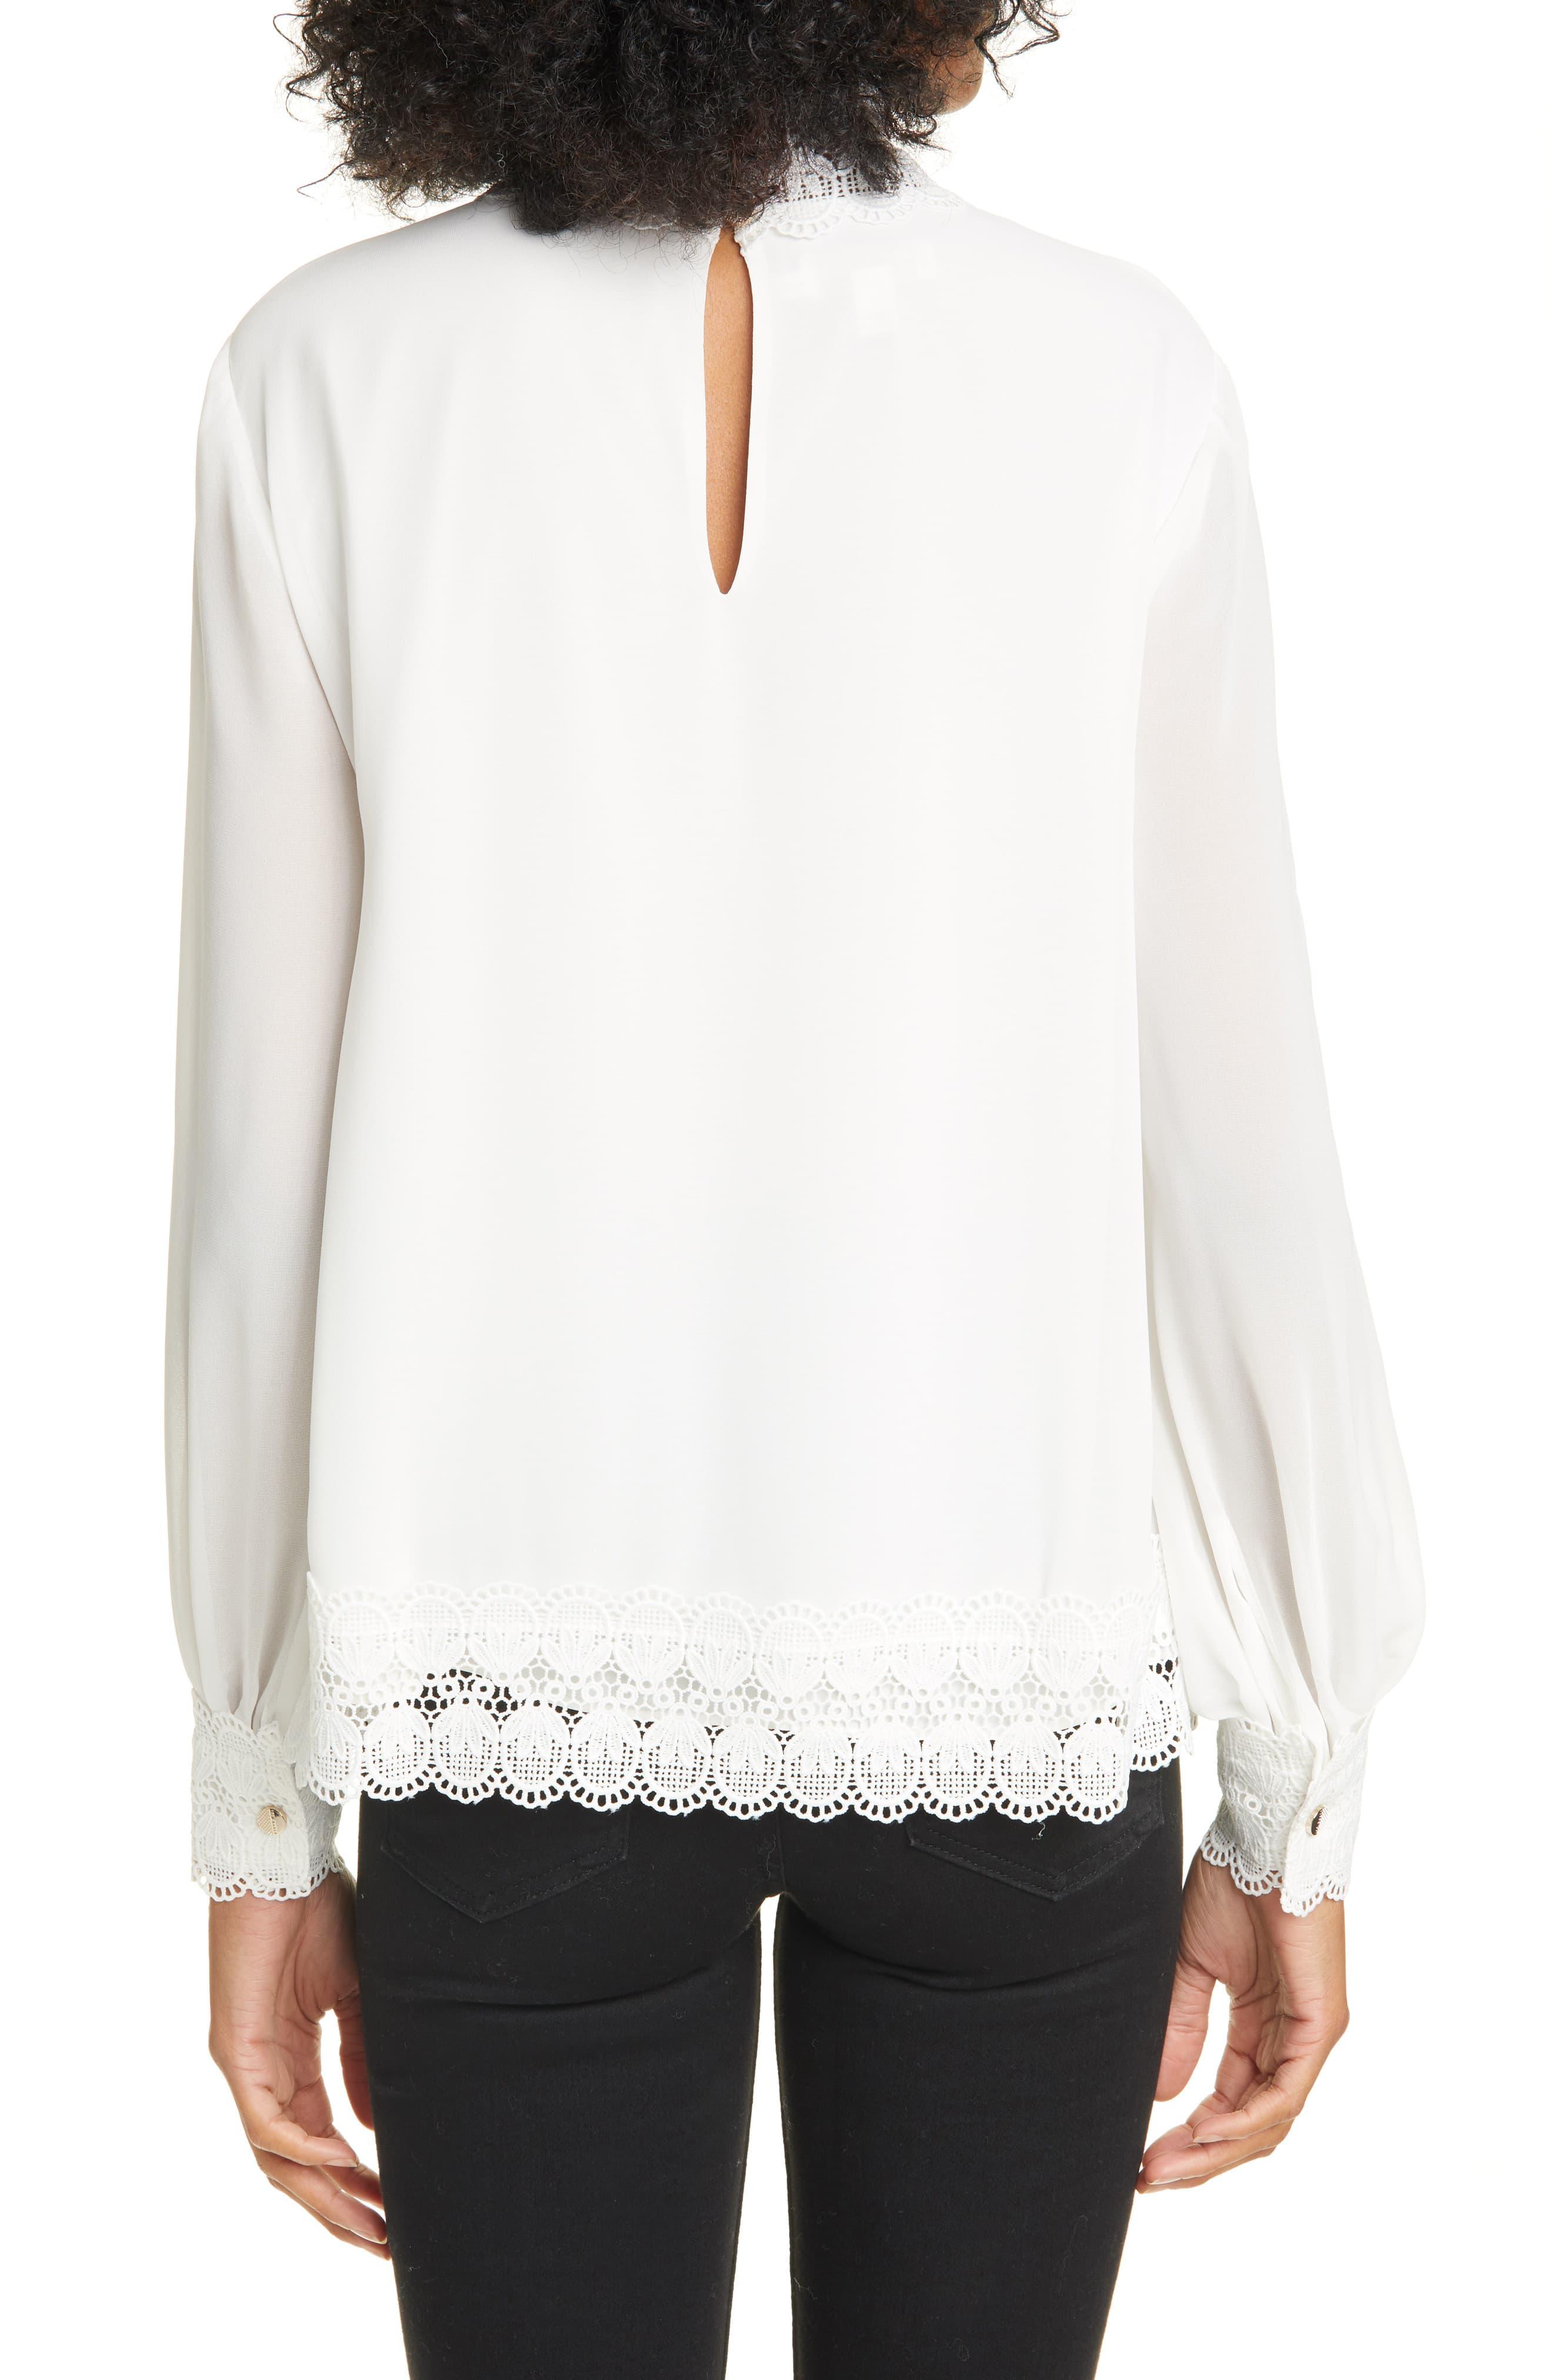 Ted Baker Cailley Lace High Neck Blouse in Ivory (White) - Lyst